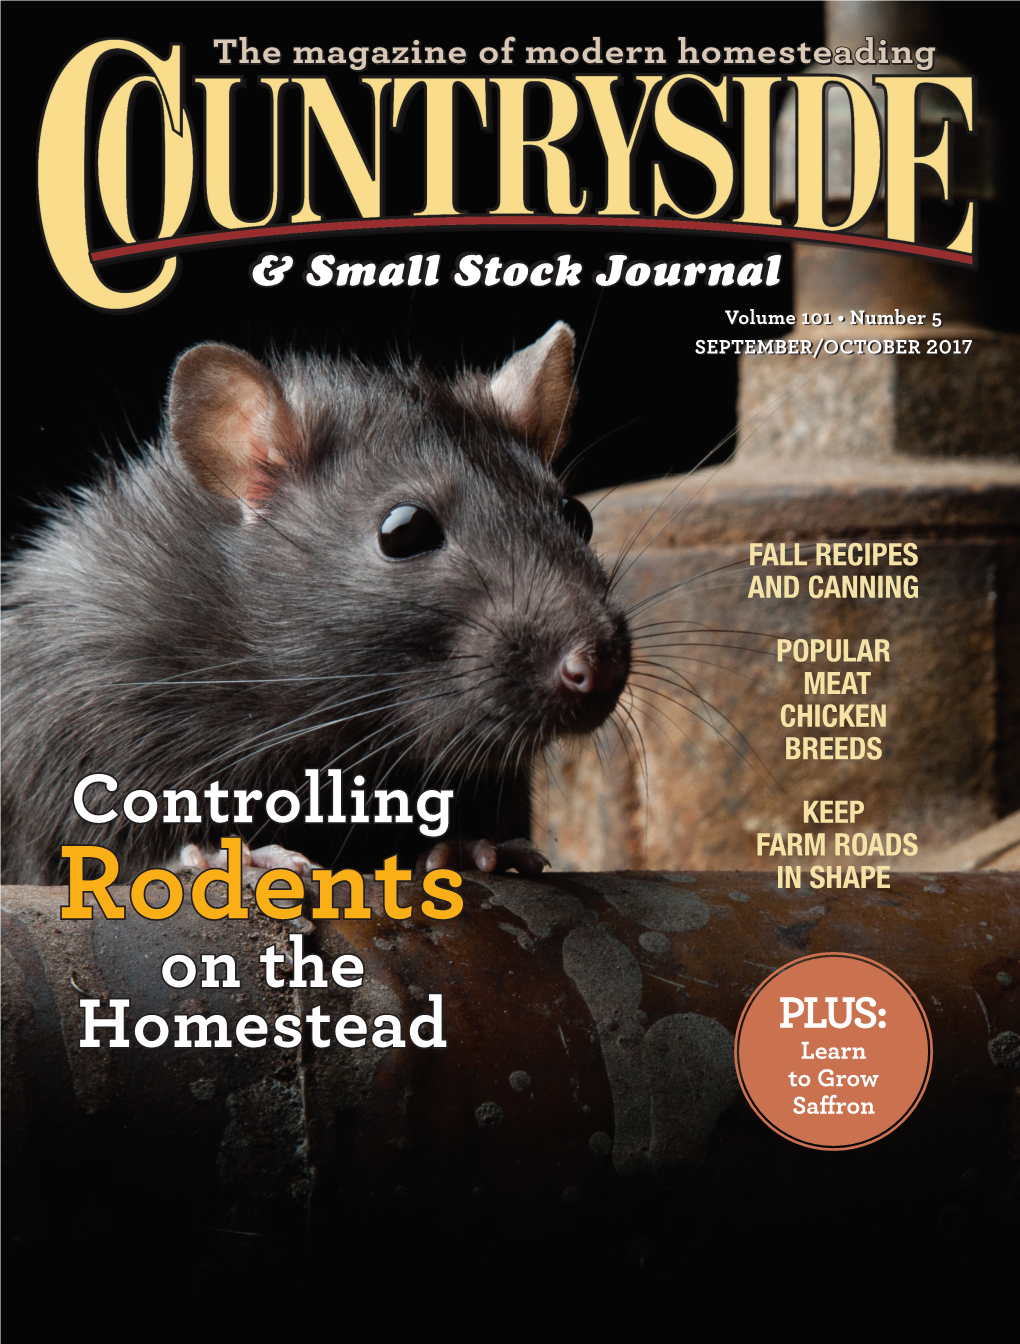 Rodents in SHAPE on the PLUS: Homestead Learn to Grow Saffron HUNTING SEASON IS HERE!